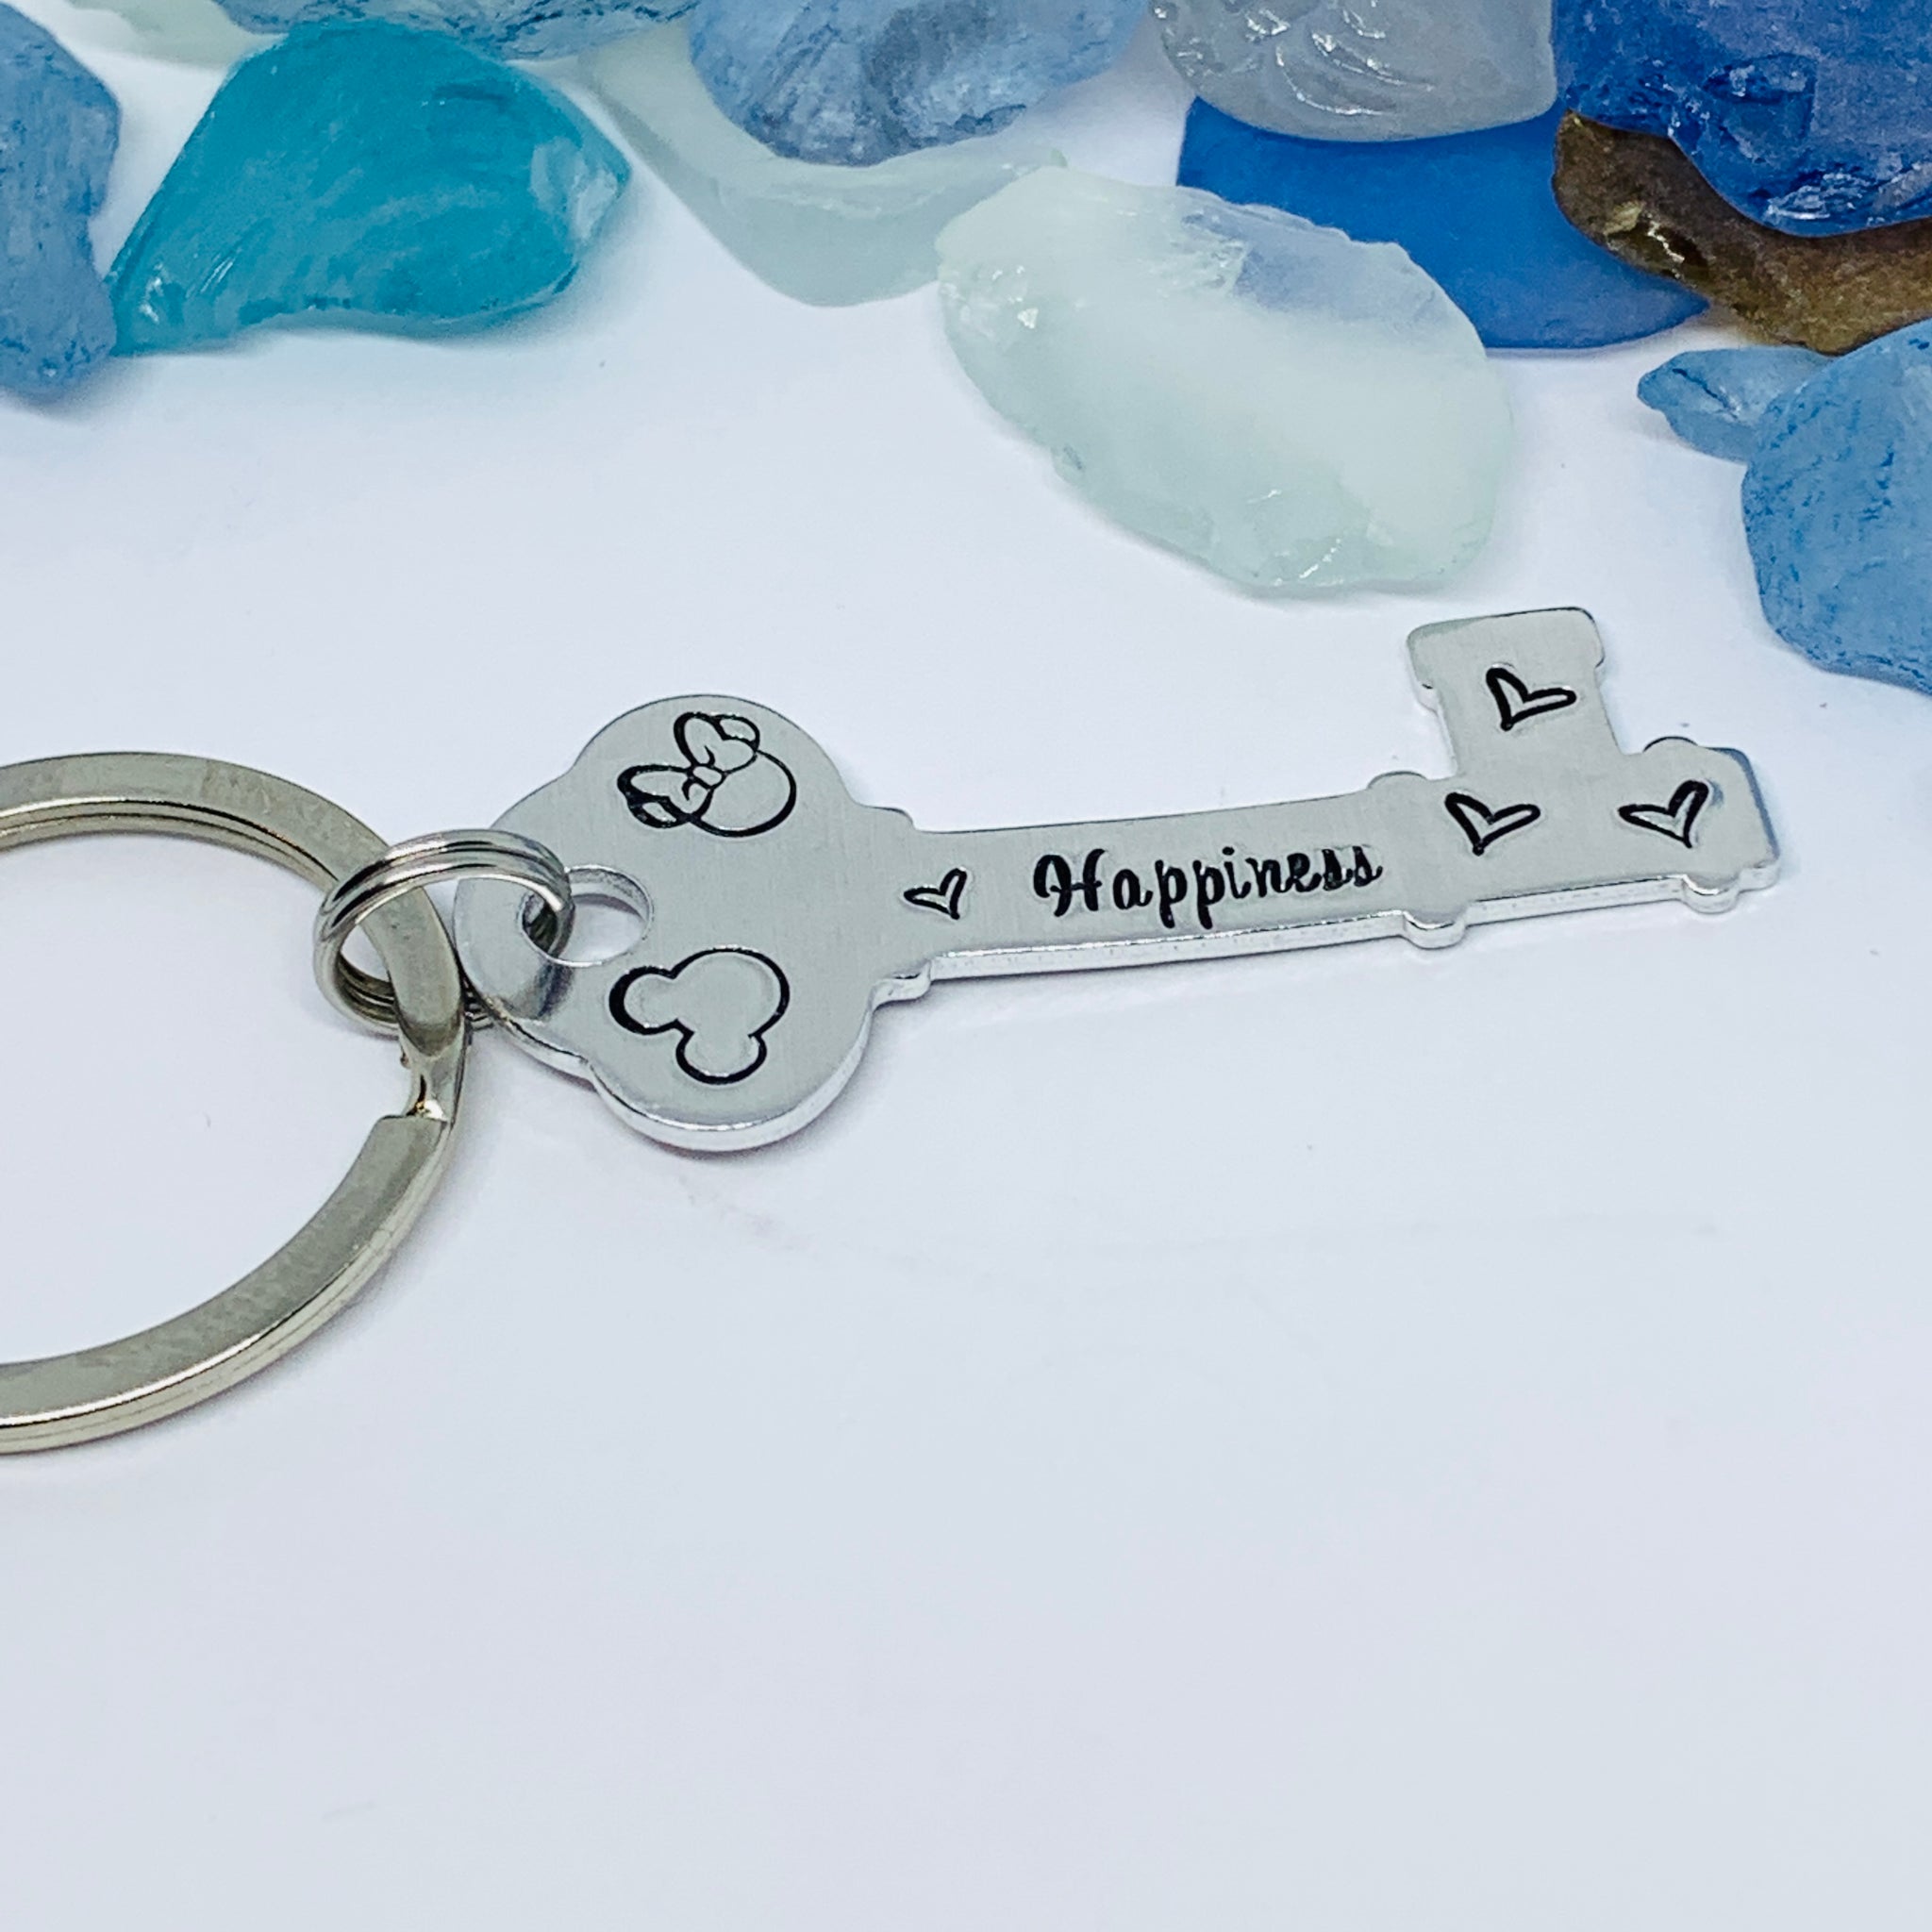 Disney-Inspired Happiness Key | Hand Stamped Key to Happiness | His & Her Mouse Key